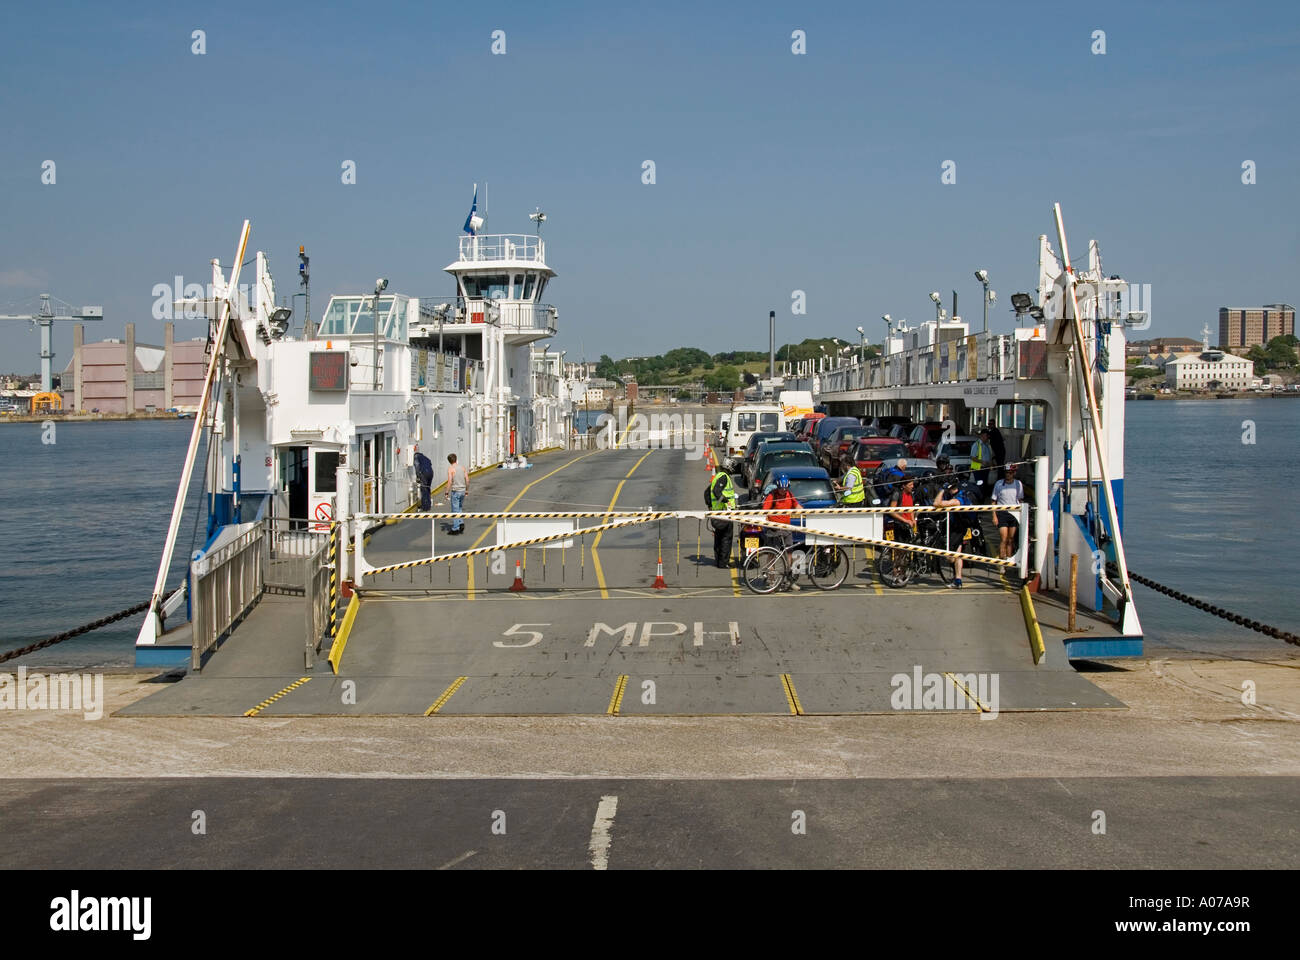 DepartingTorpoint Cornwall to Devonport in Devon chain ferry for vehicle & pedestrian use crossing the Hamoaze estuary of The River Tamar England UK Stock Photo